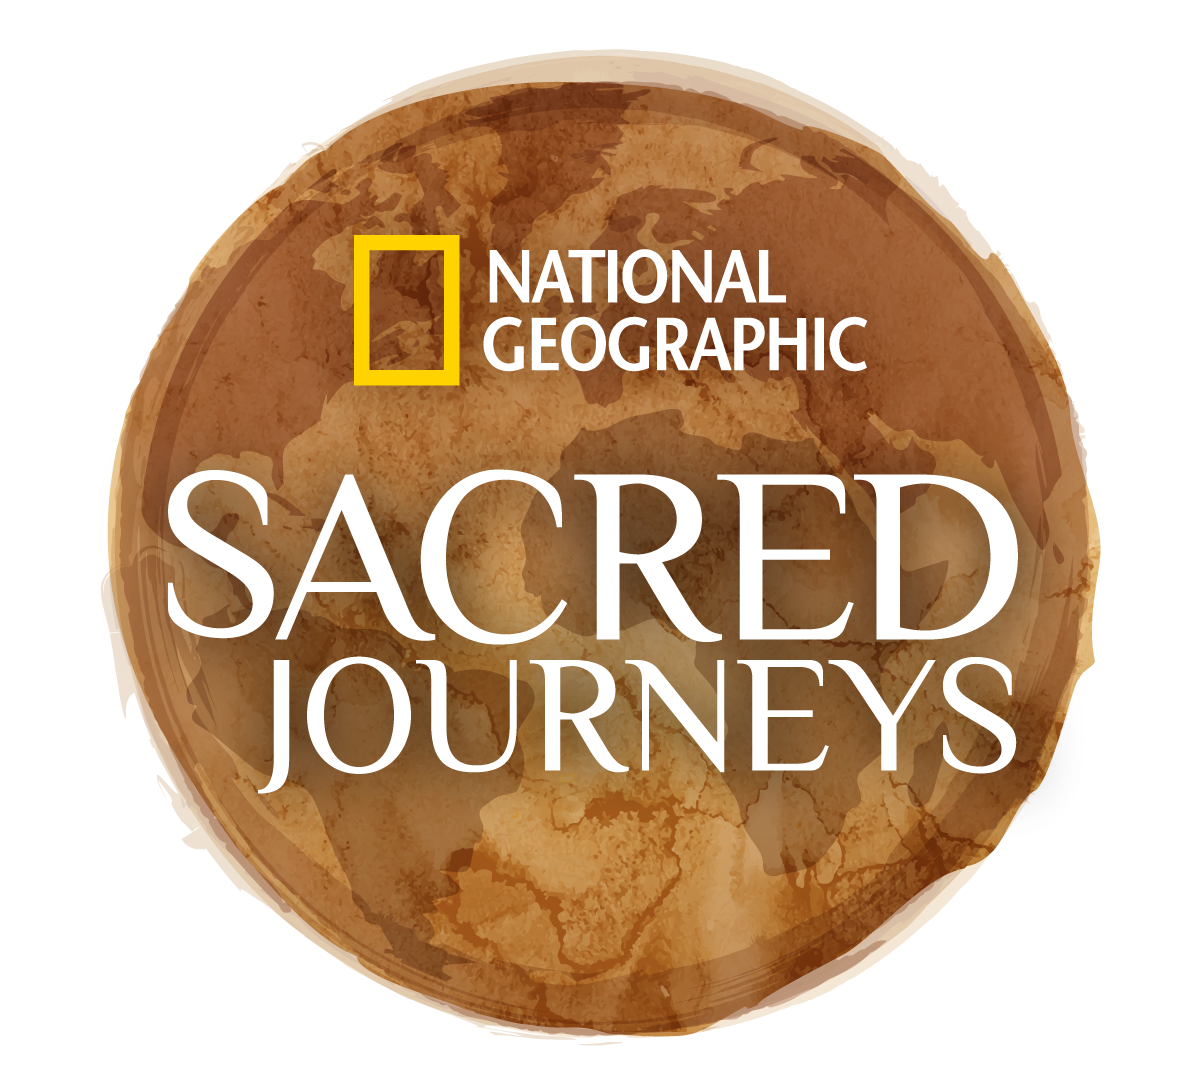 National Geographic Sacred Journeys on display at Baylor University's Mayborn Museum October 1 through December 31, 2016